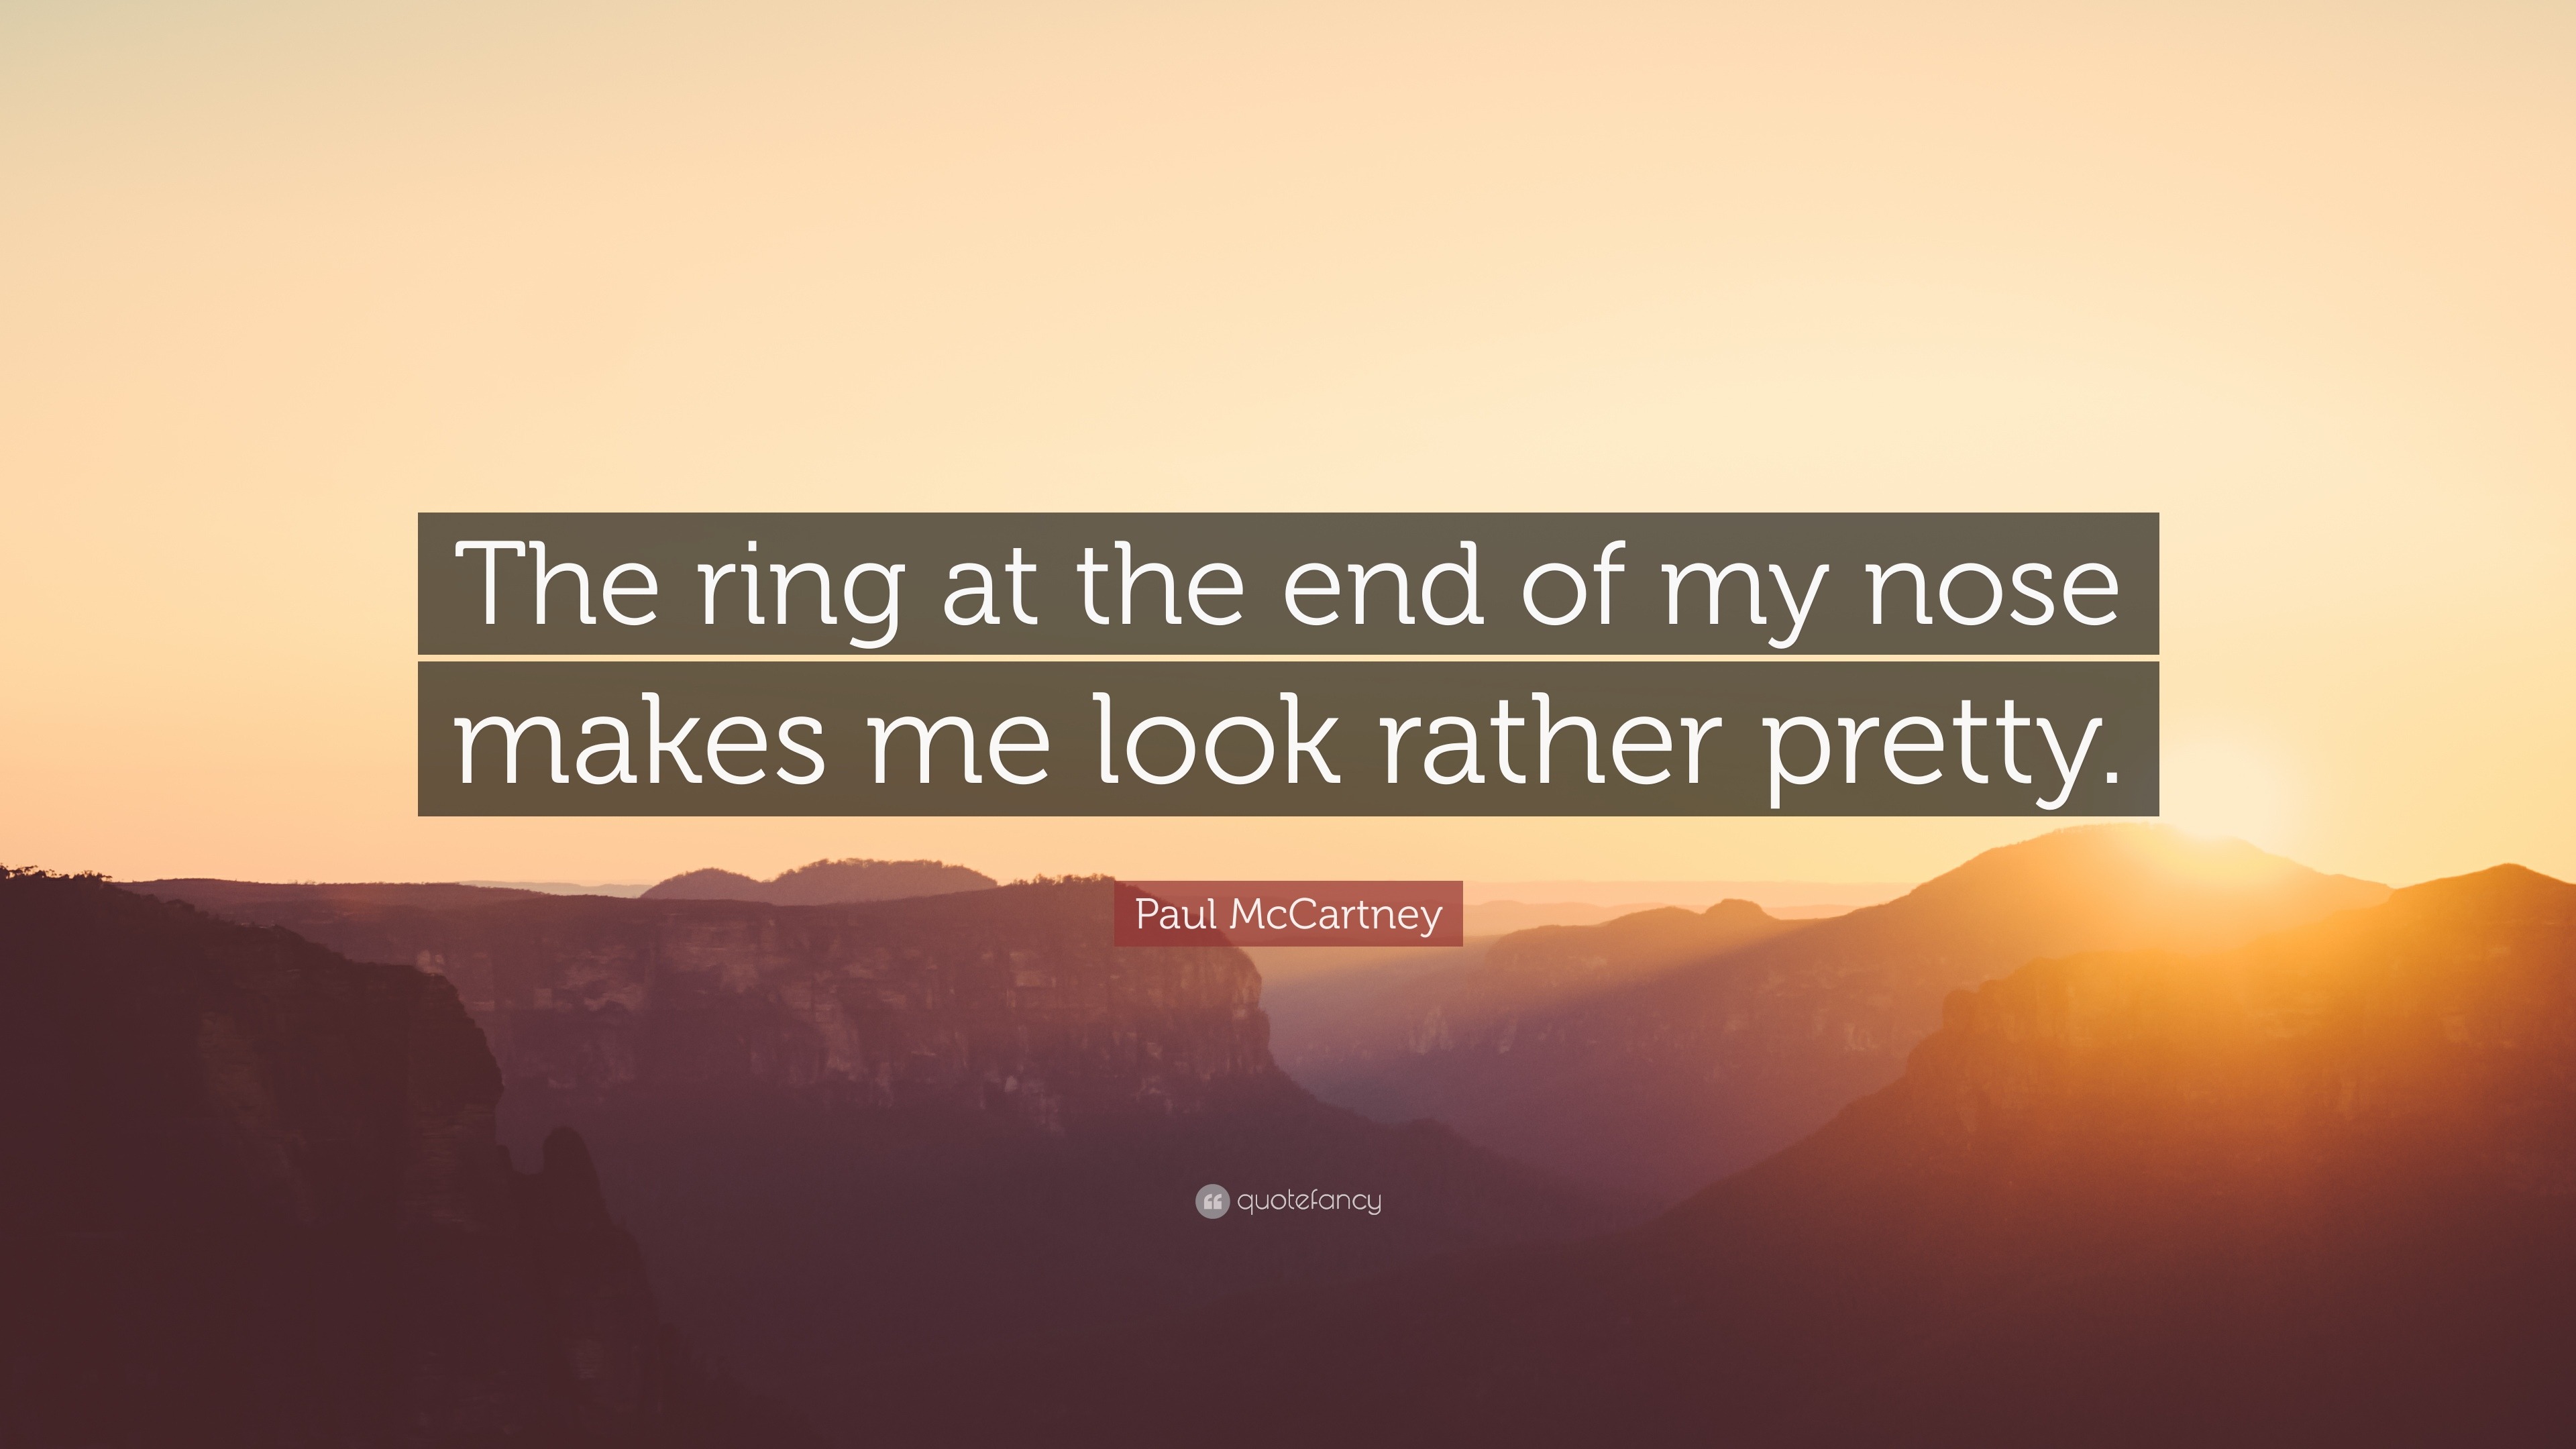 1872022 Paul McCartney Quote The ring at the end of my nose makes me look